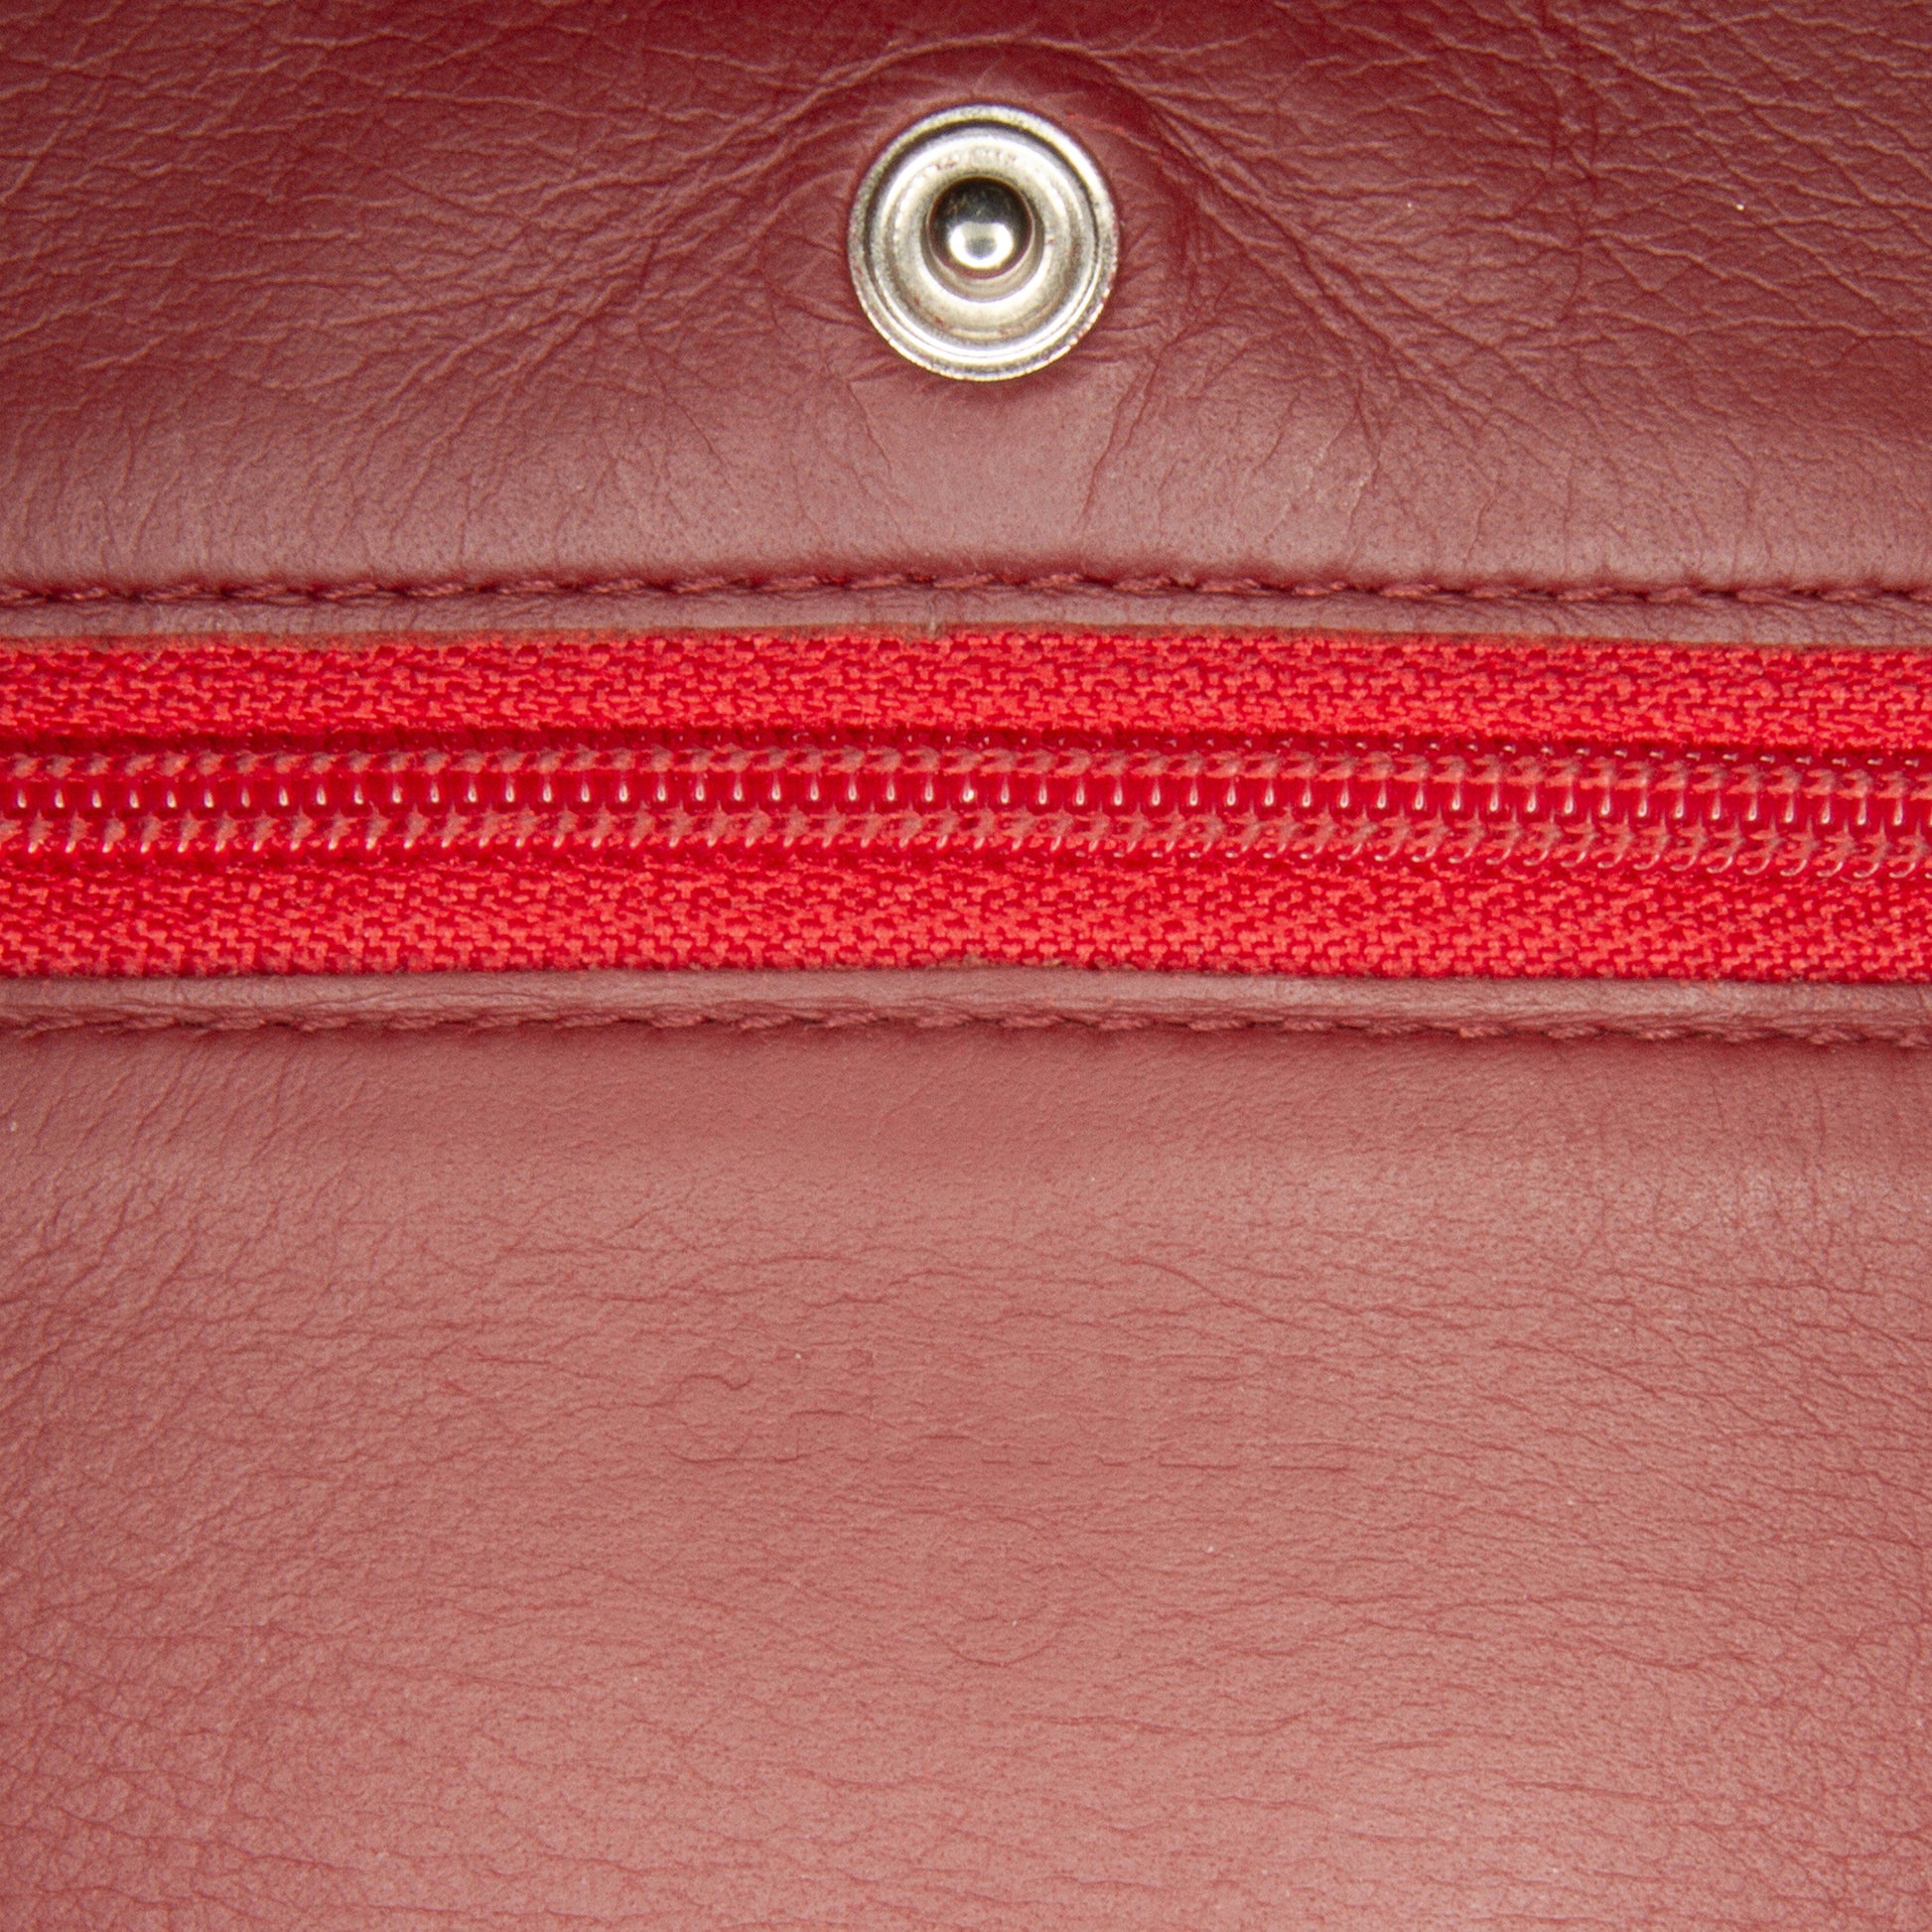 Classic Lambskin Wallet on Chain Red - Gaby Paris